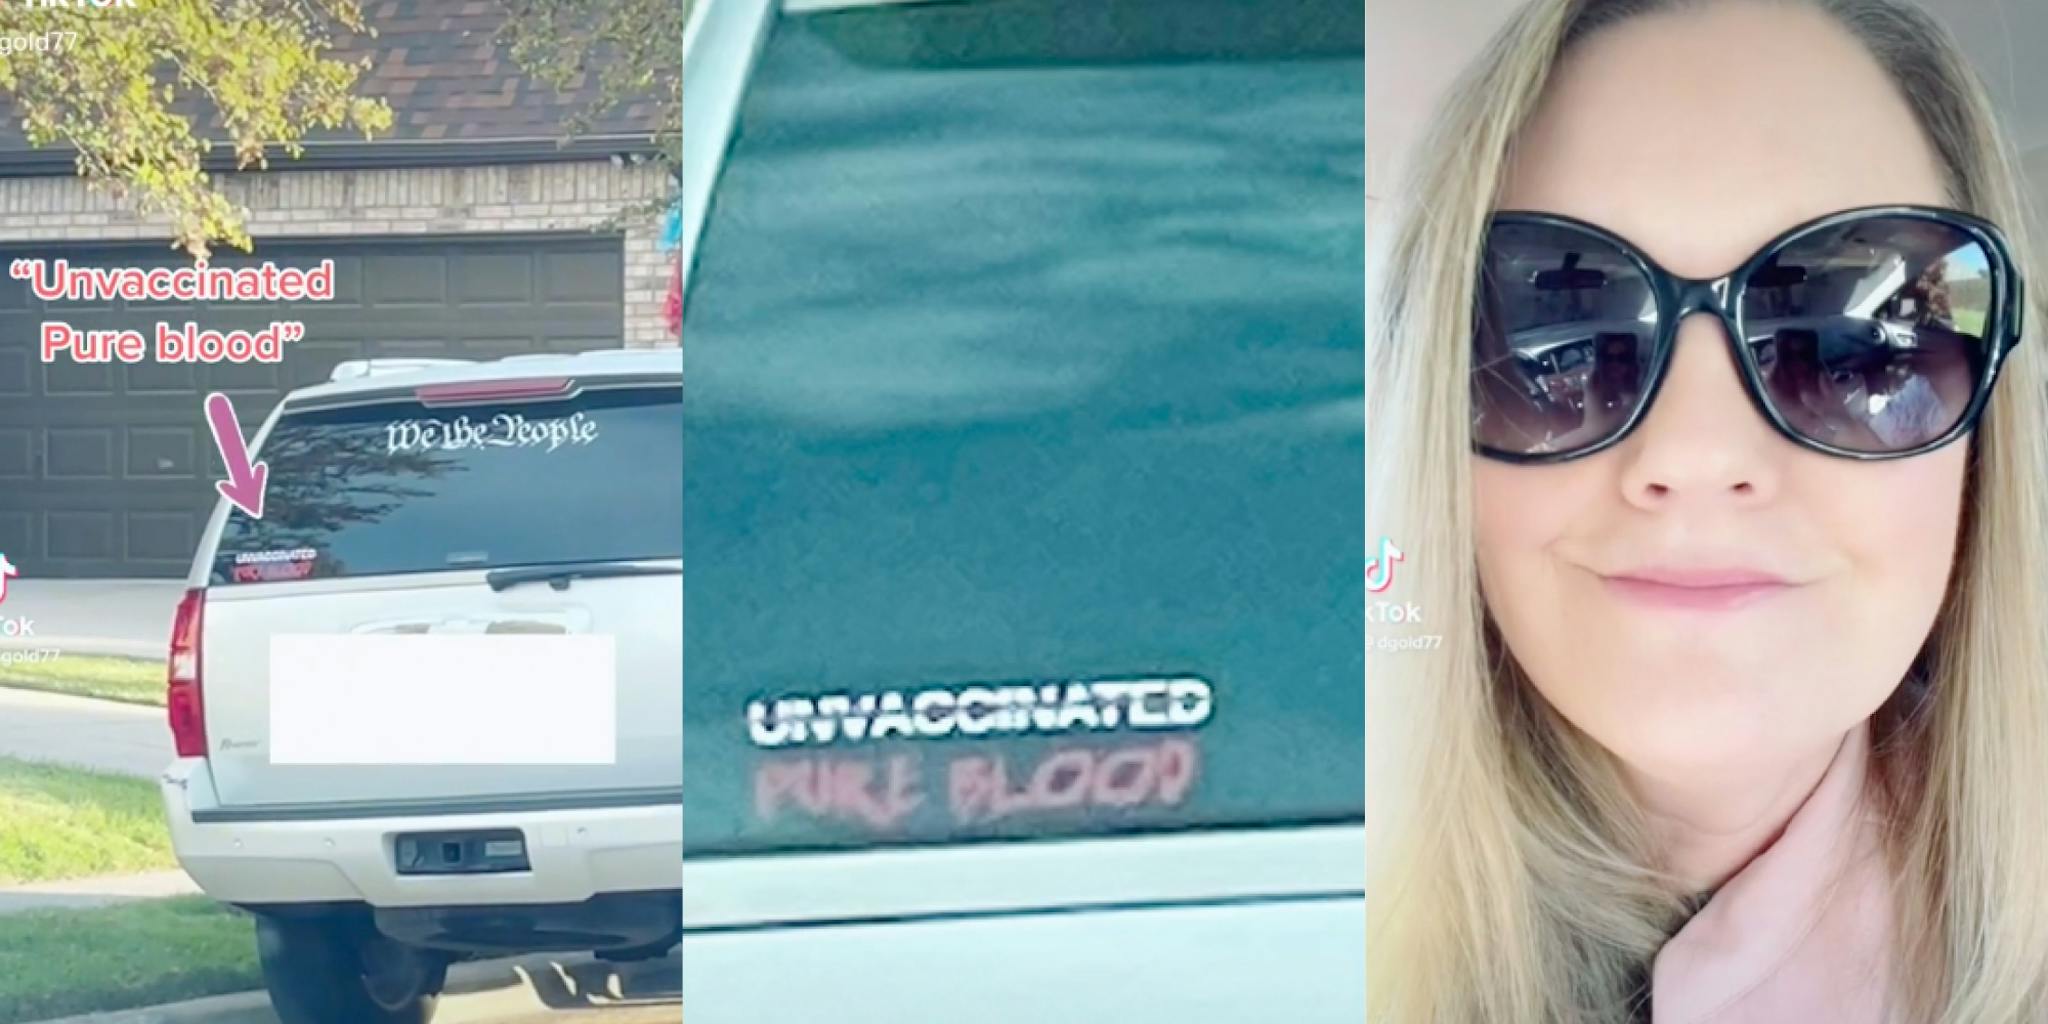 ‘At least they come with warning labels now’: TikToker spots ‘unvaccinated pure blood’ bumper sticker